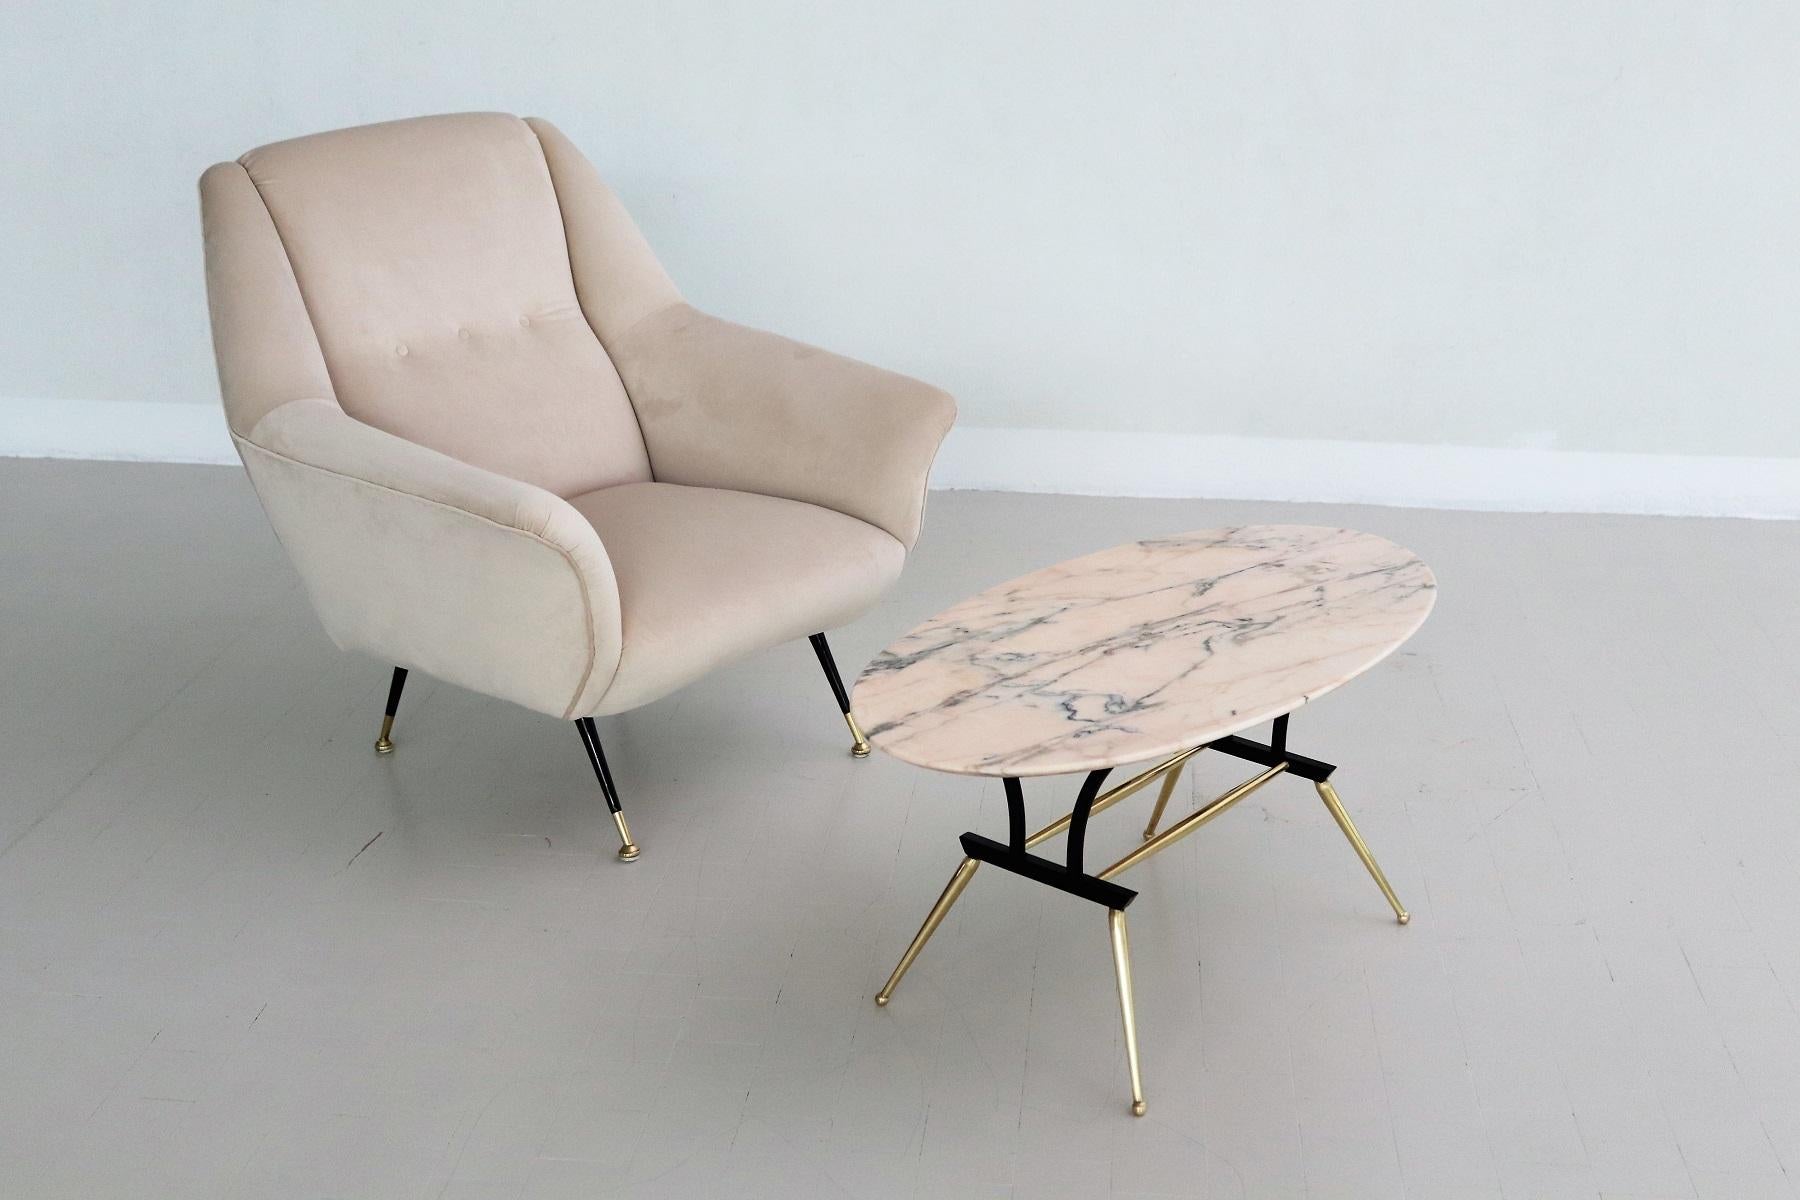 Magnificent oval coffee table with gorgeous elegant light pink and light grey marble top and brass / metal legs.
Made in Italy during the 1950s.
The marble is called 